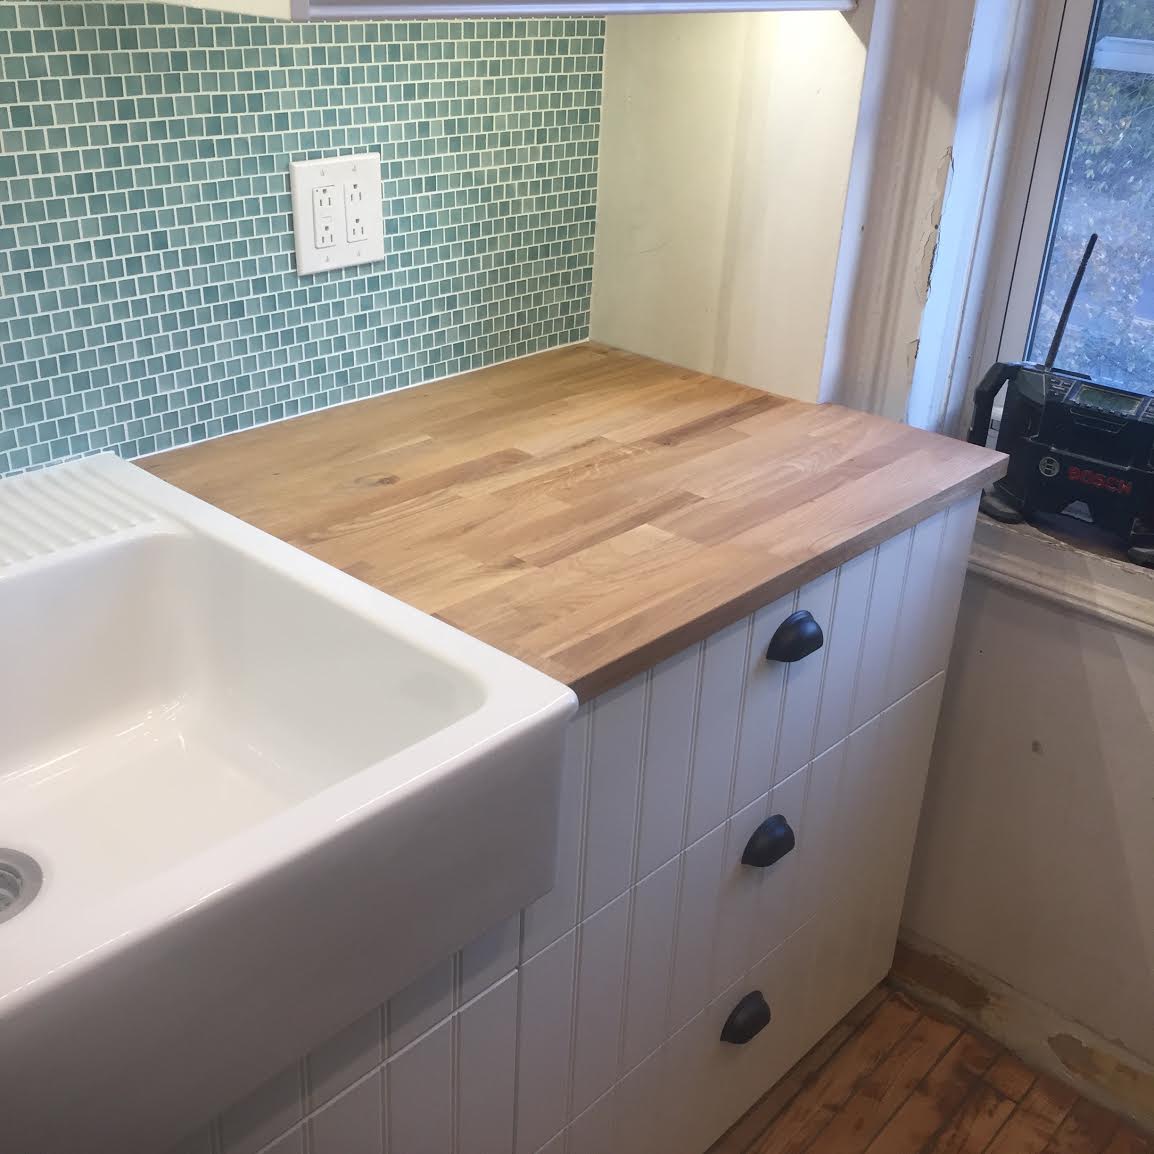 Read This Before You Buy Butcher Block Counters Basic Builders